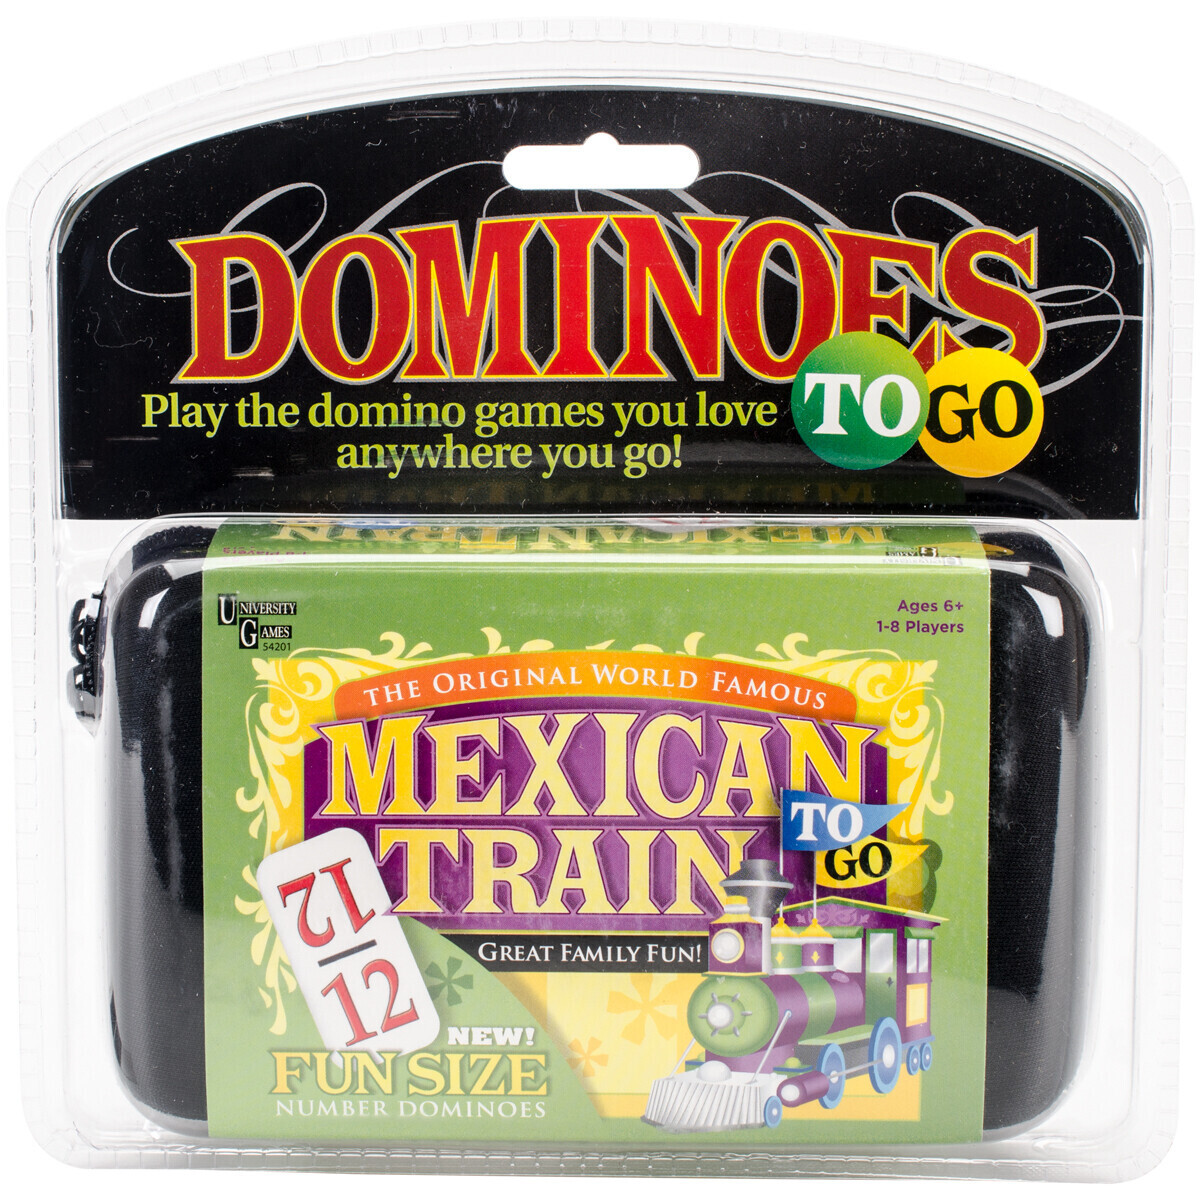 Mexican Train To Go Game